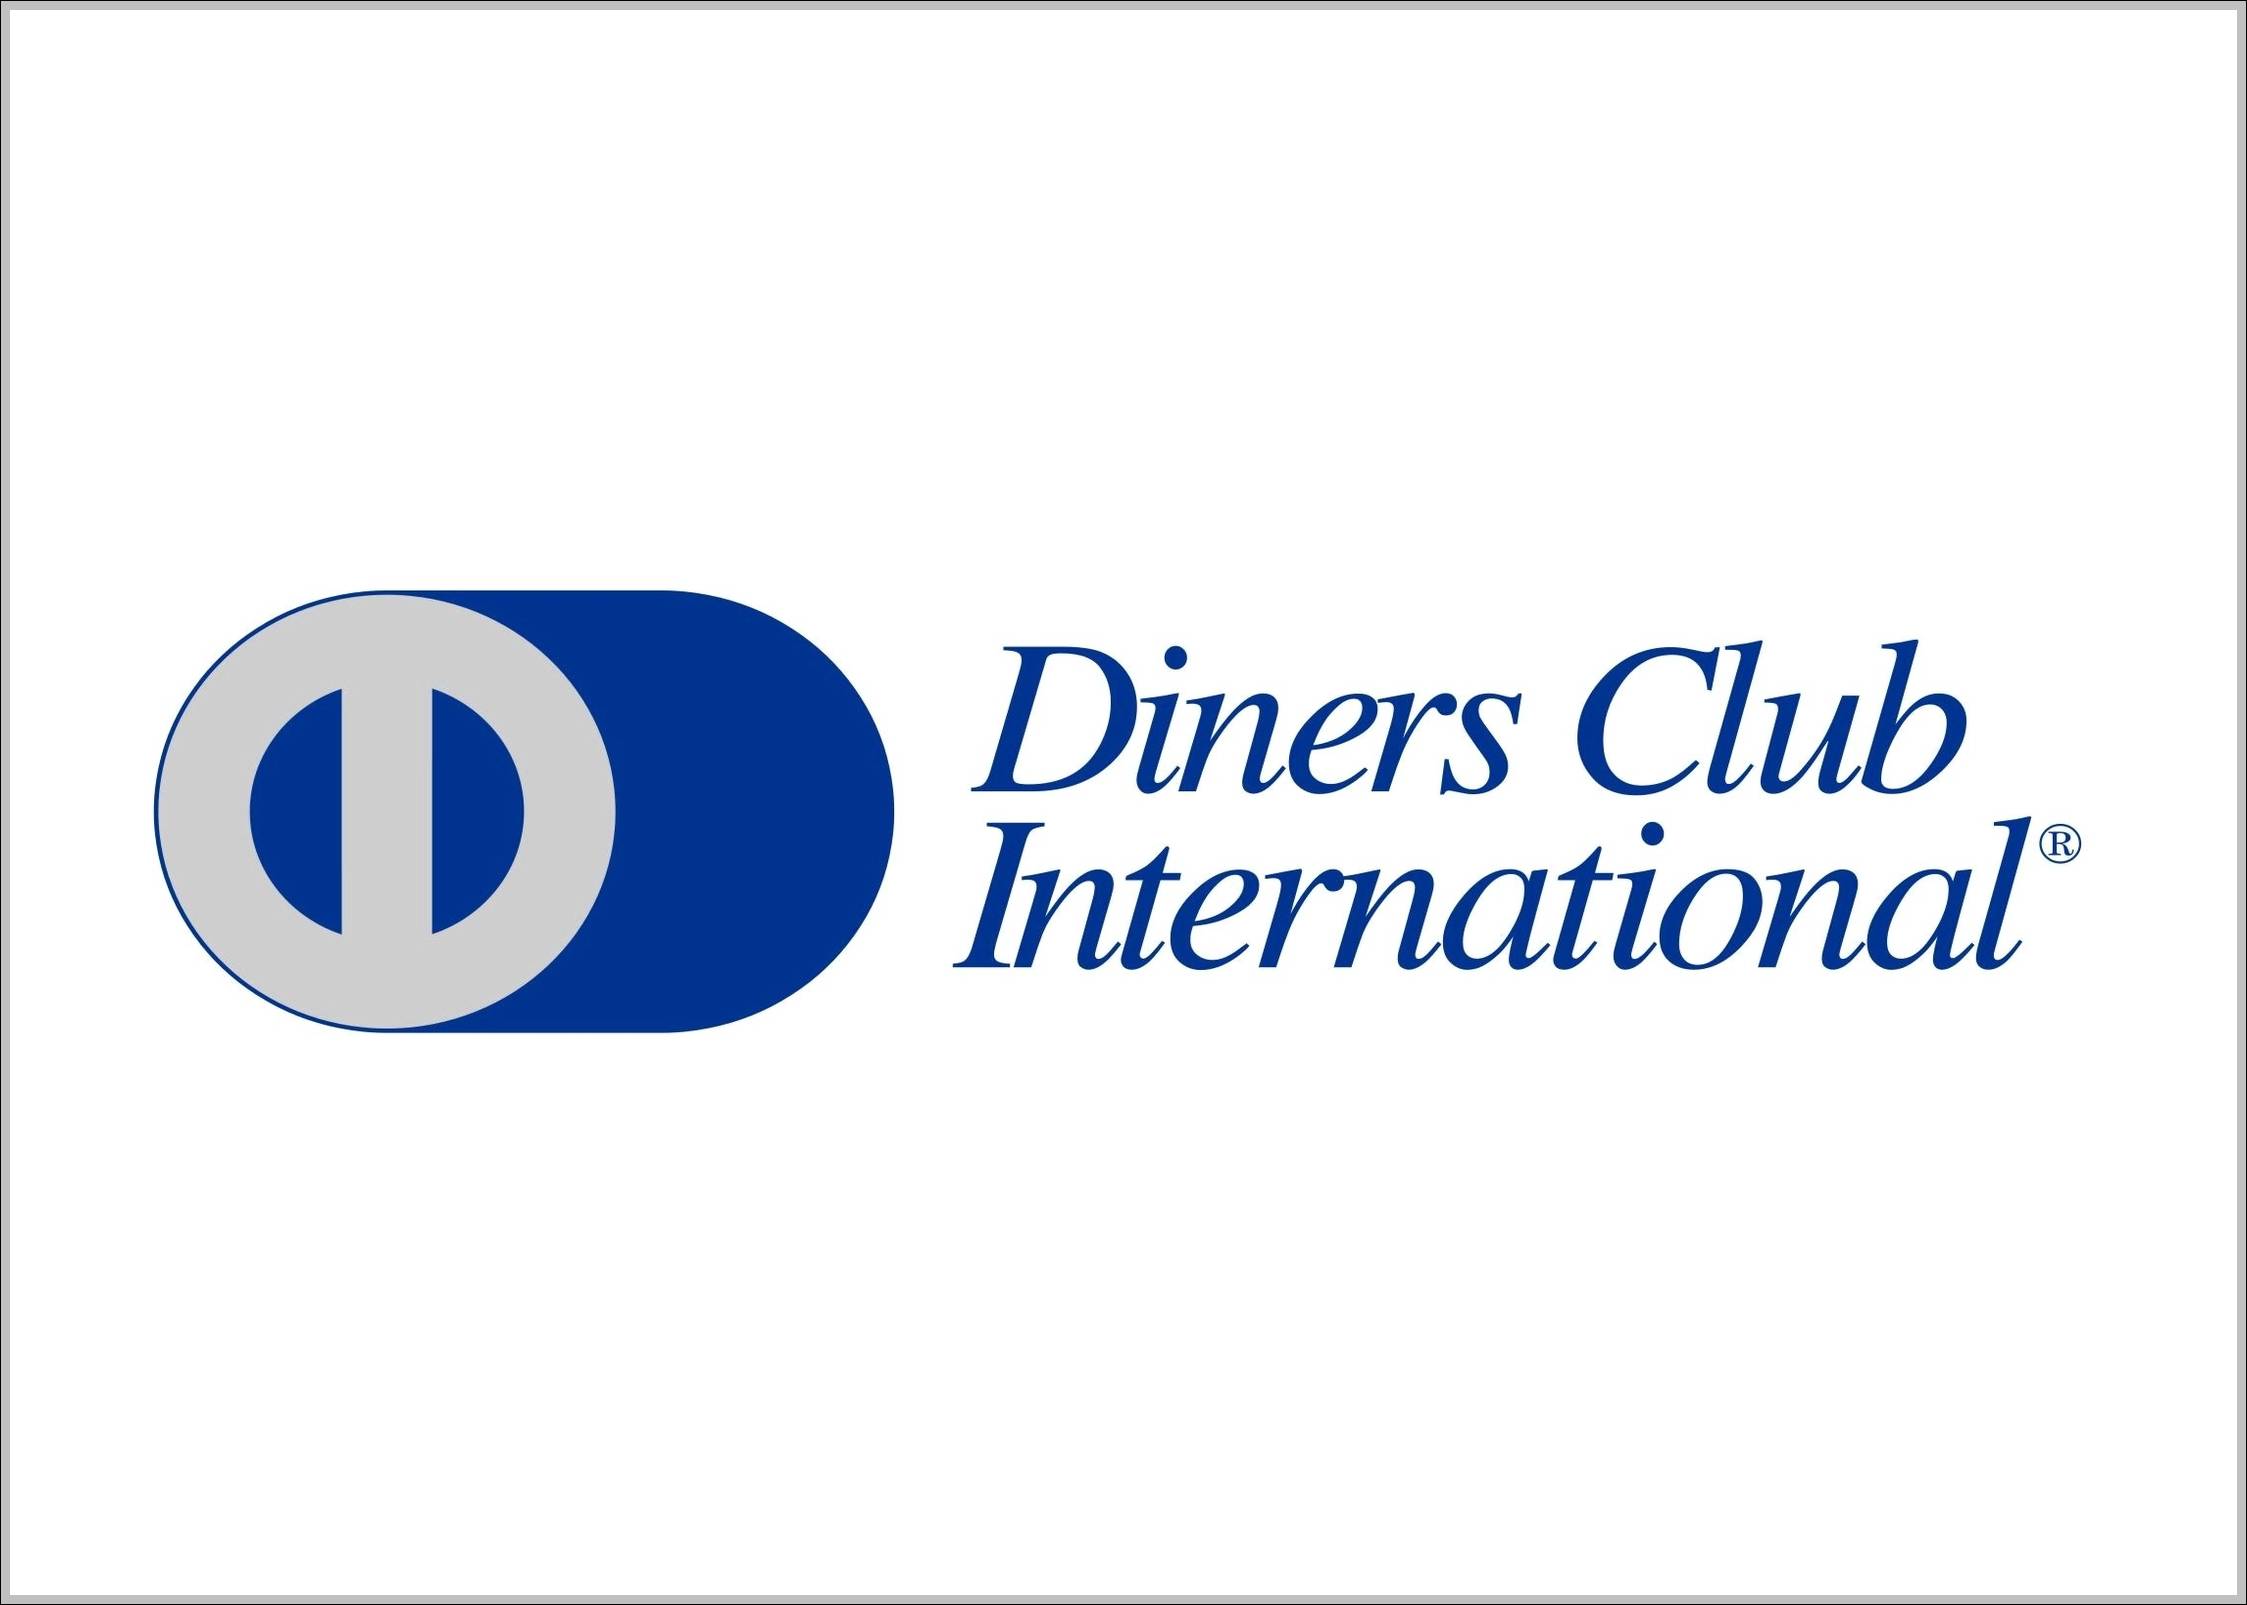 Diners Logo - Diners Club logo old | Logo Sign - Logos, Signs, Symbols, Trademarks ...